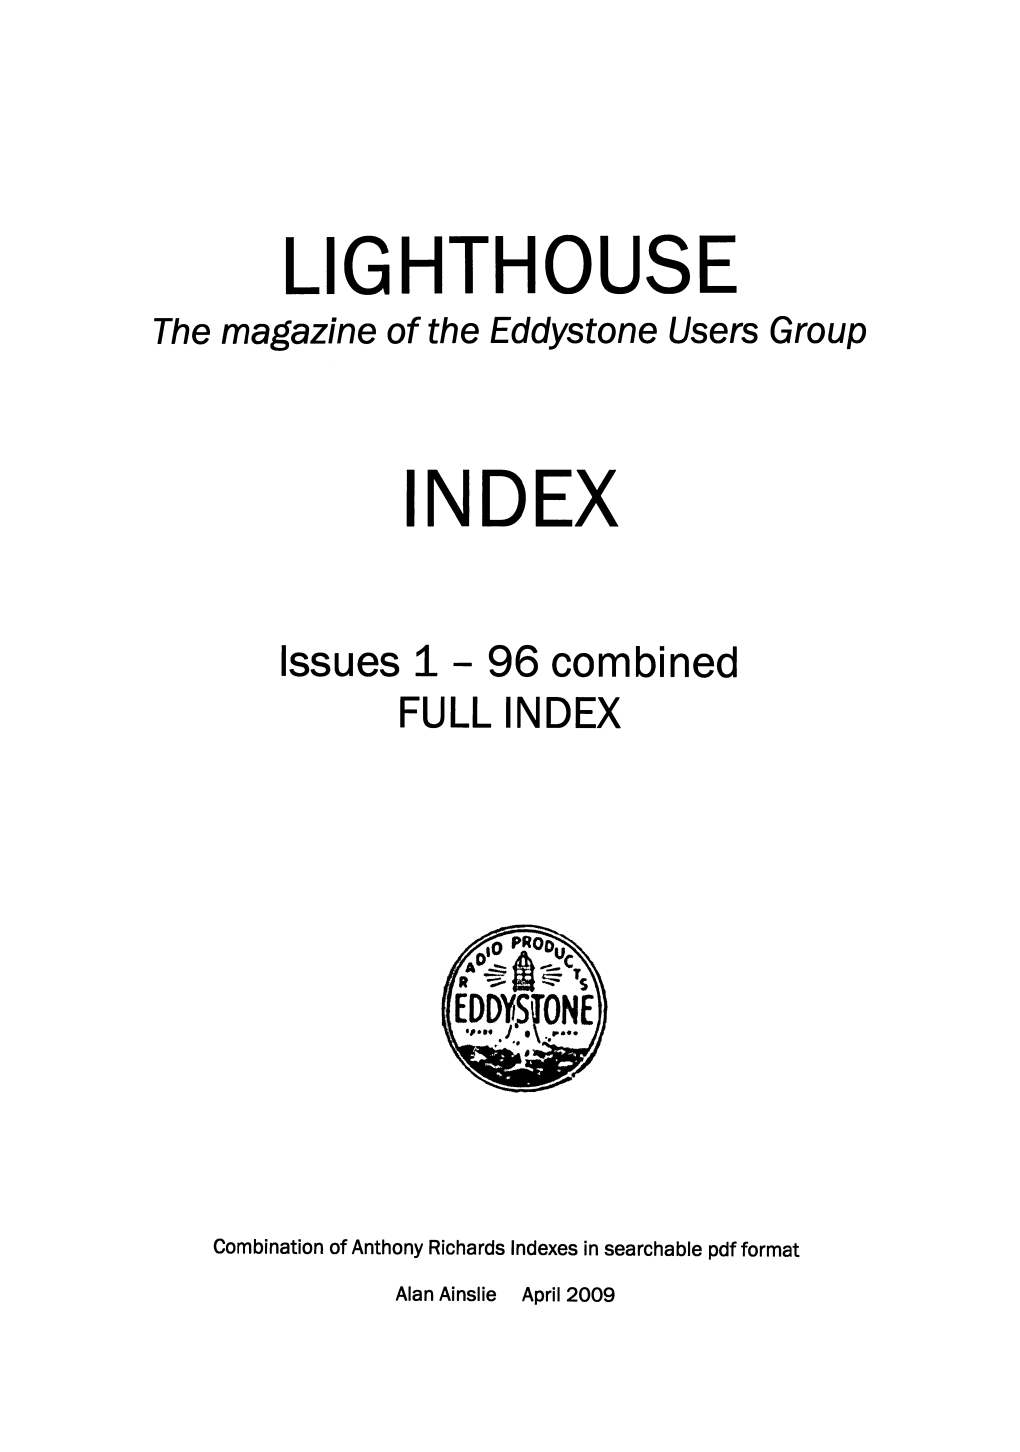 LIGHTHOUSE the Magazine of the Eddystone Users Group